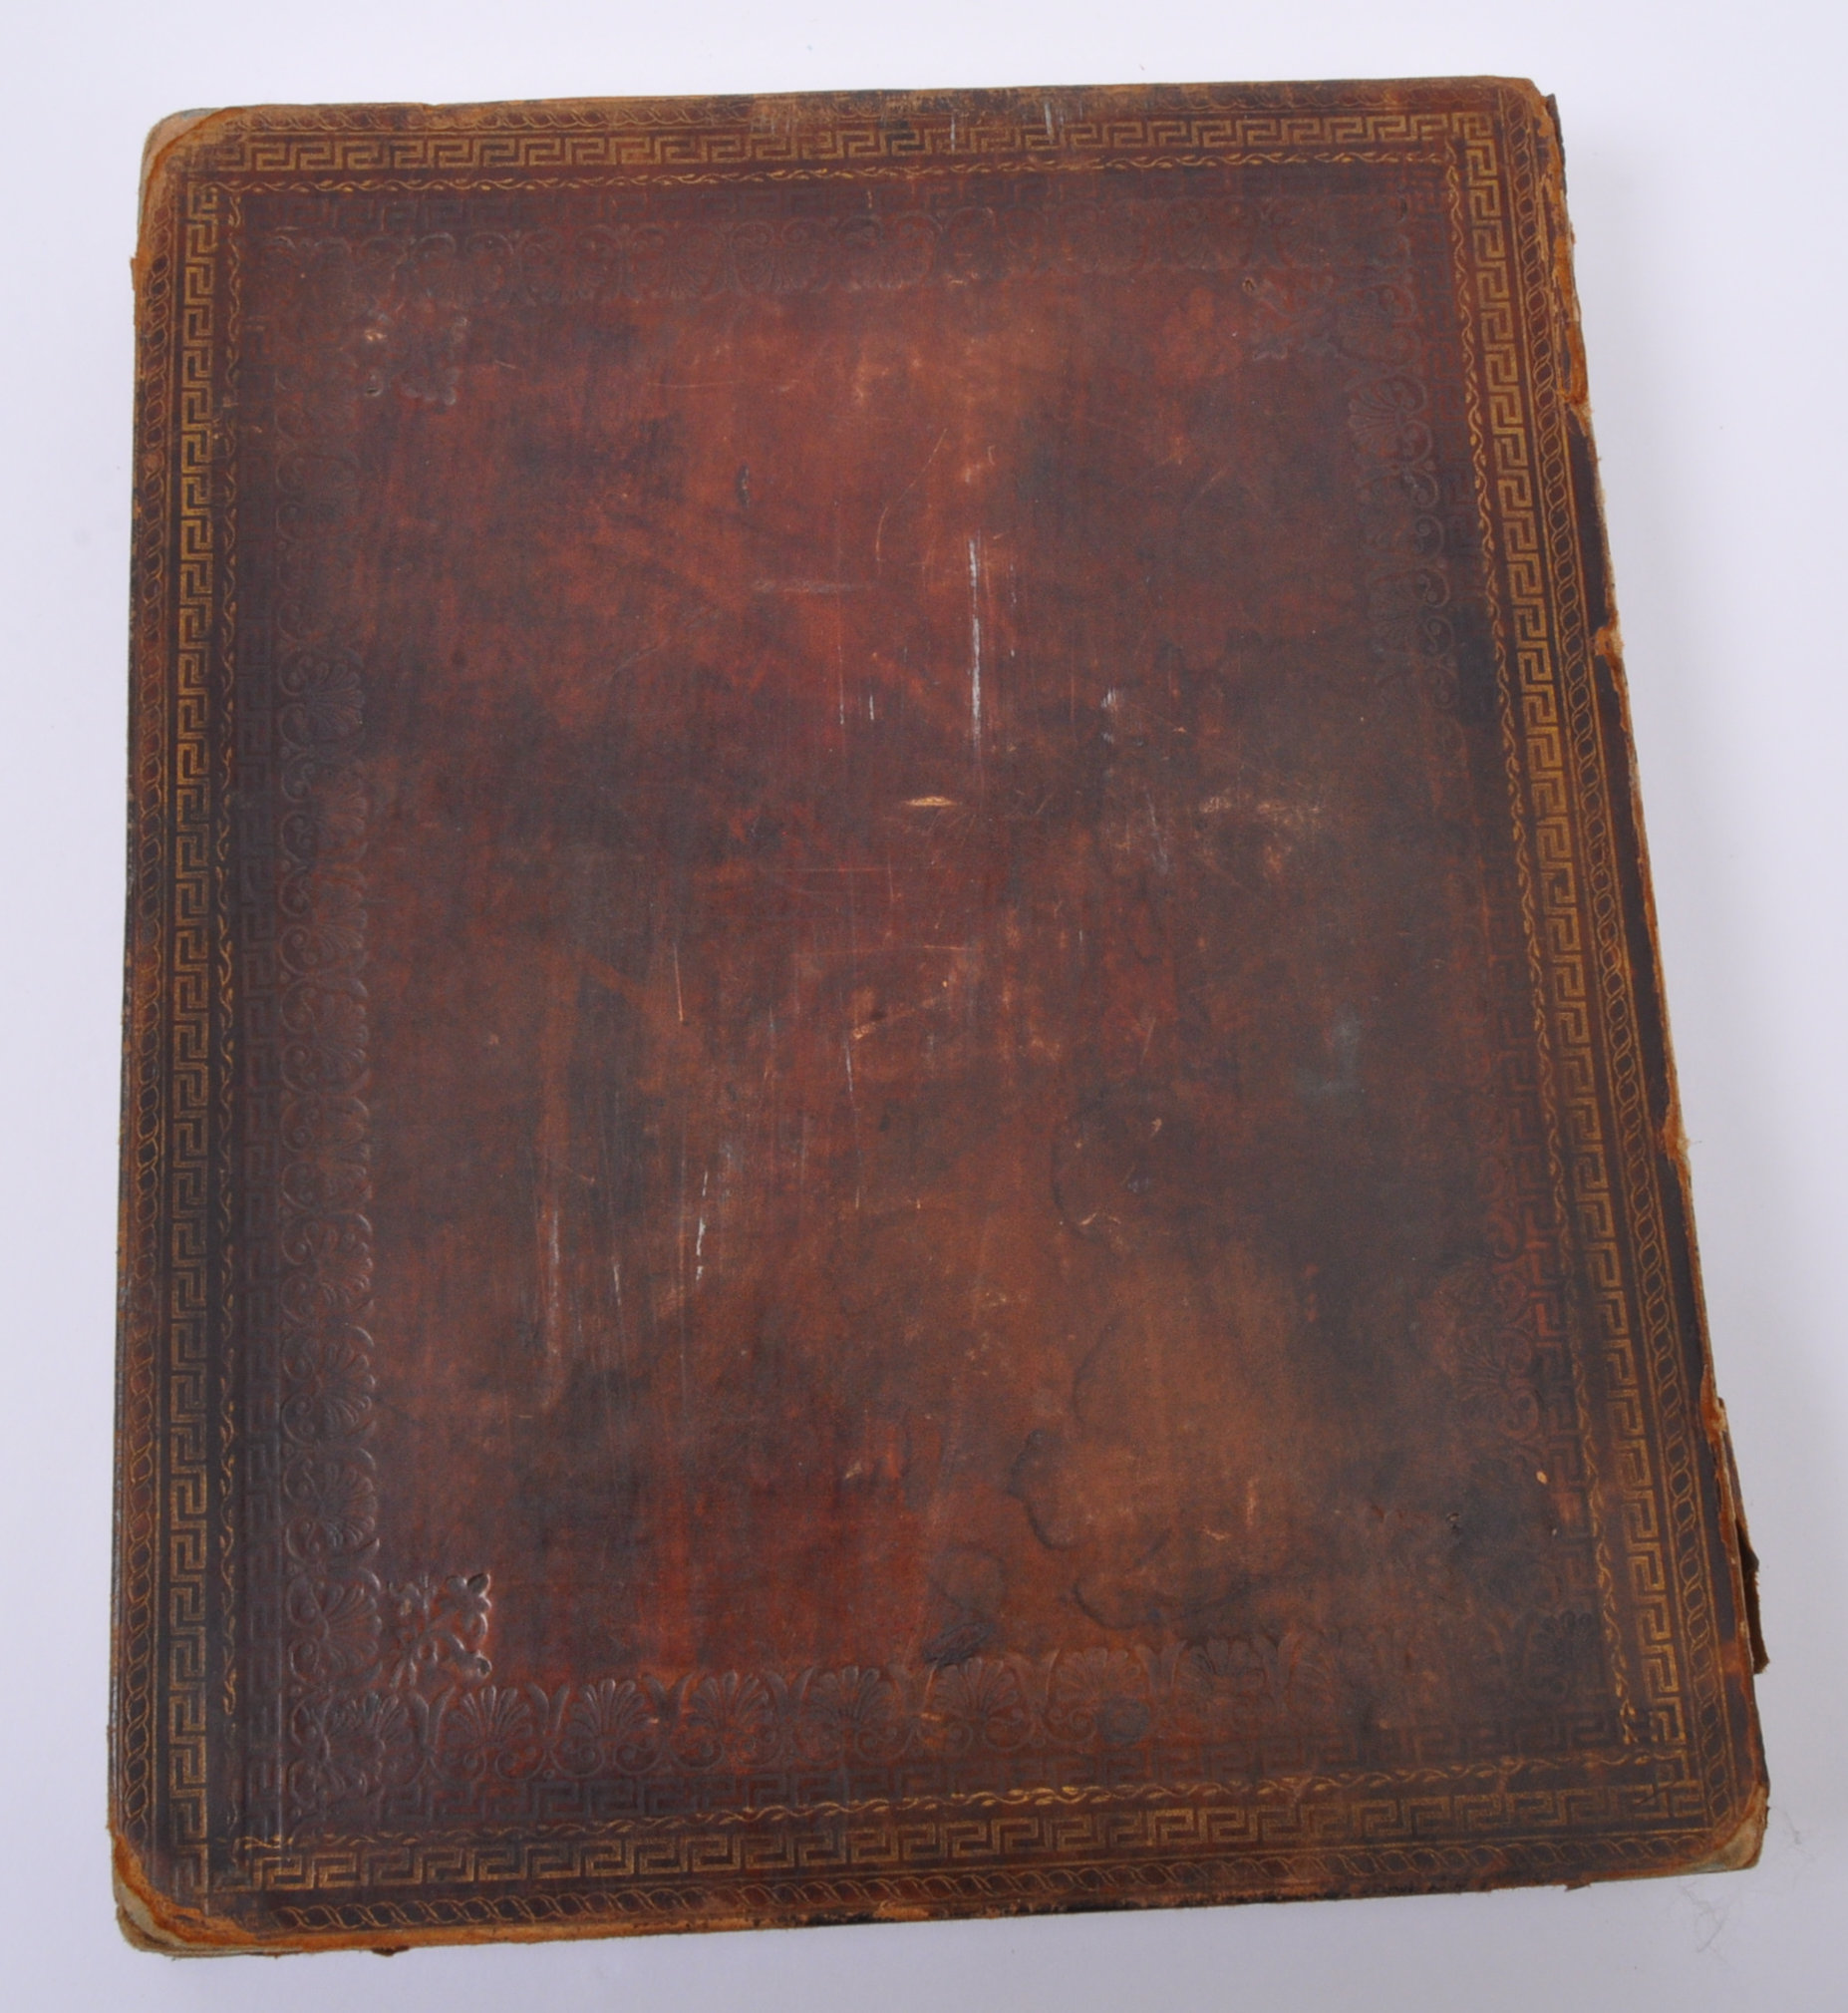 1794 - A COLLECTION OF POEMS - HANDWRITTEN MANUSCRIPT BOOK - Image 13 of 13